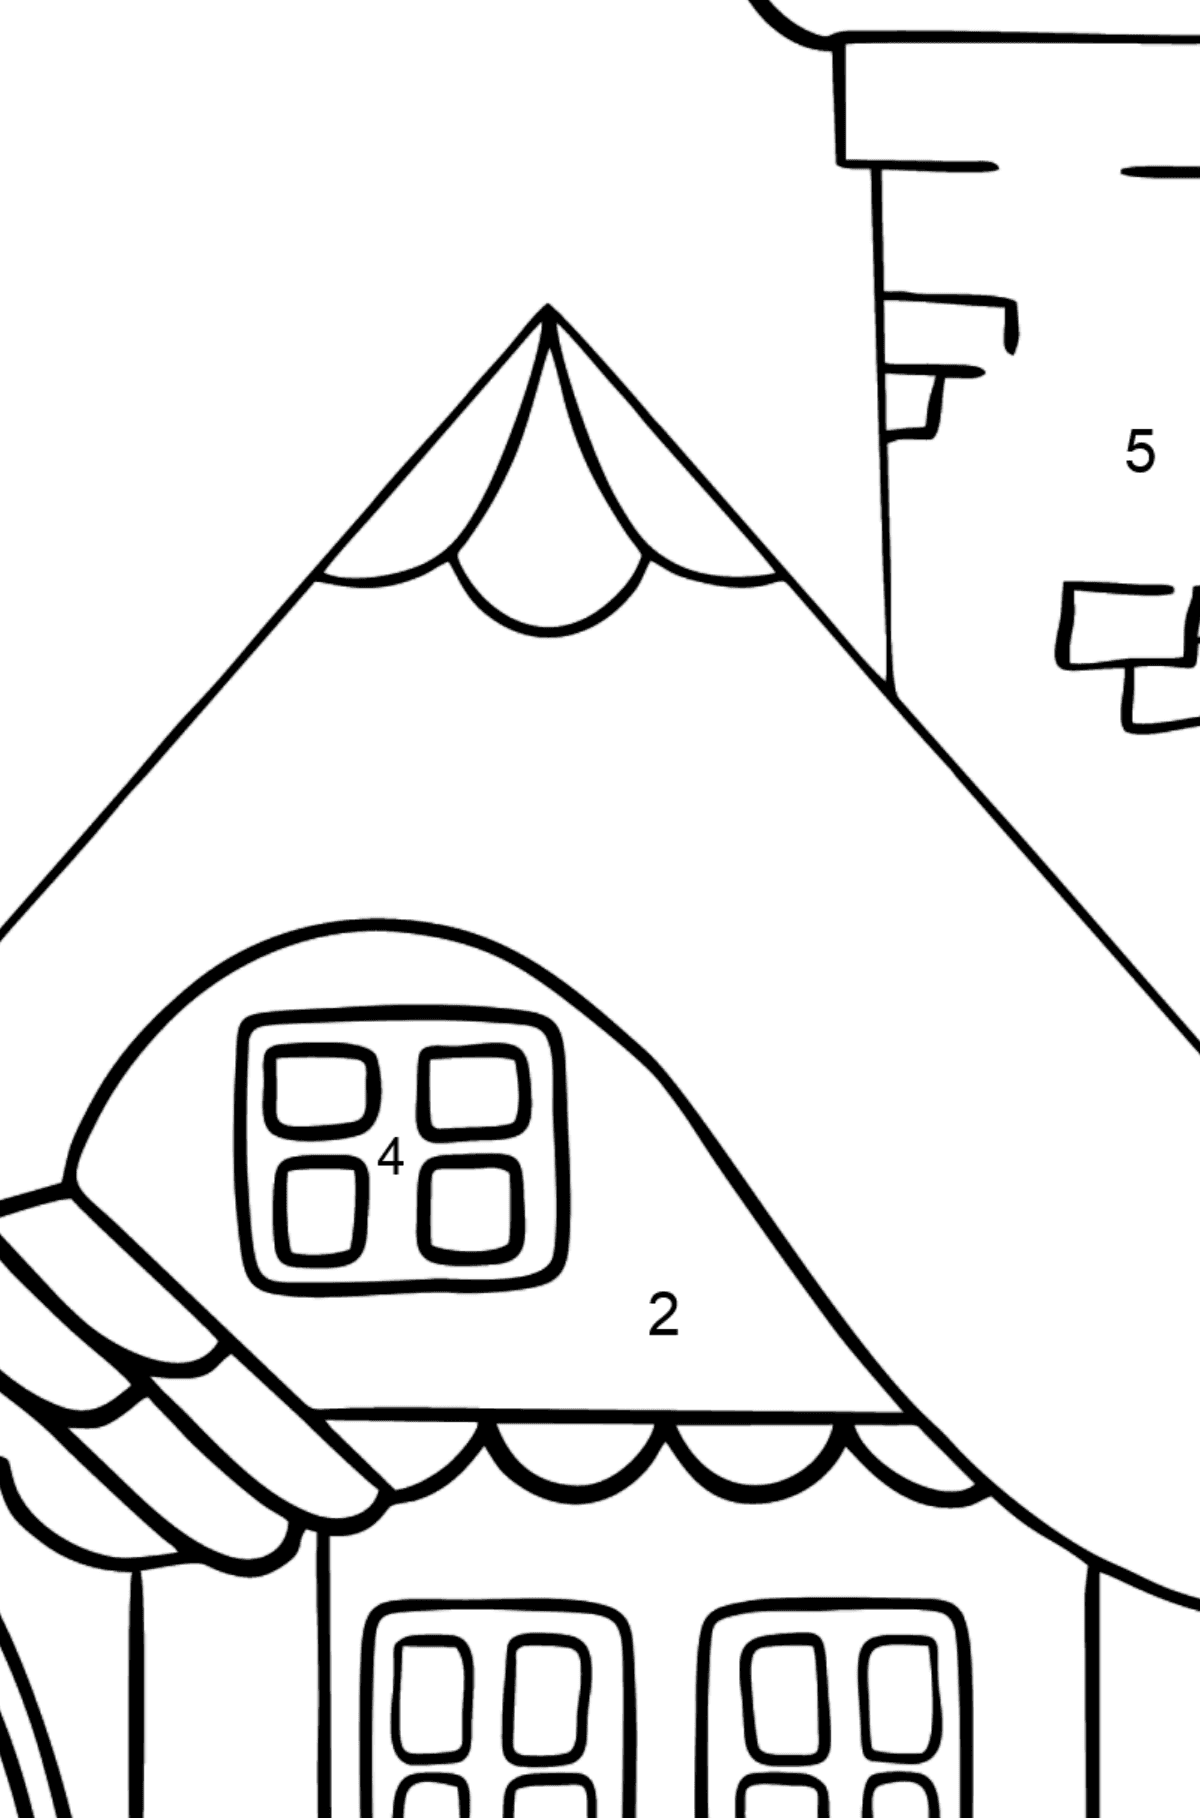 Simple Coloring Page - A Wonderful House - Coloring by Numbers for Kids